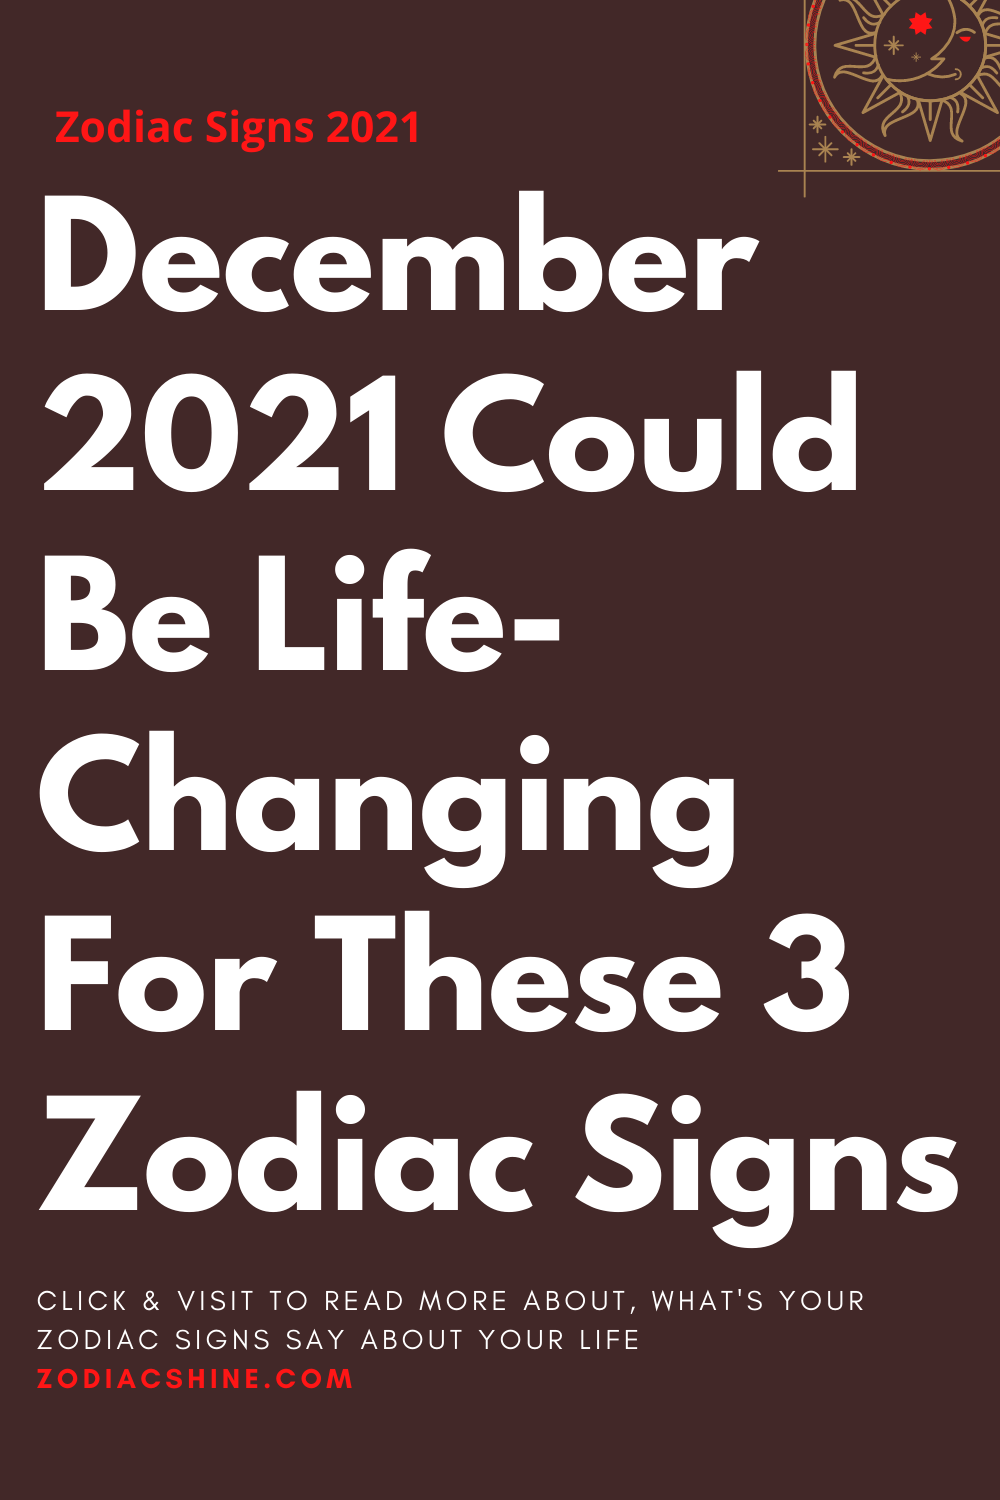 December 2021 Could Be Life-Changing For These 3 Zodiac Signs